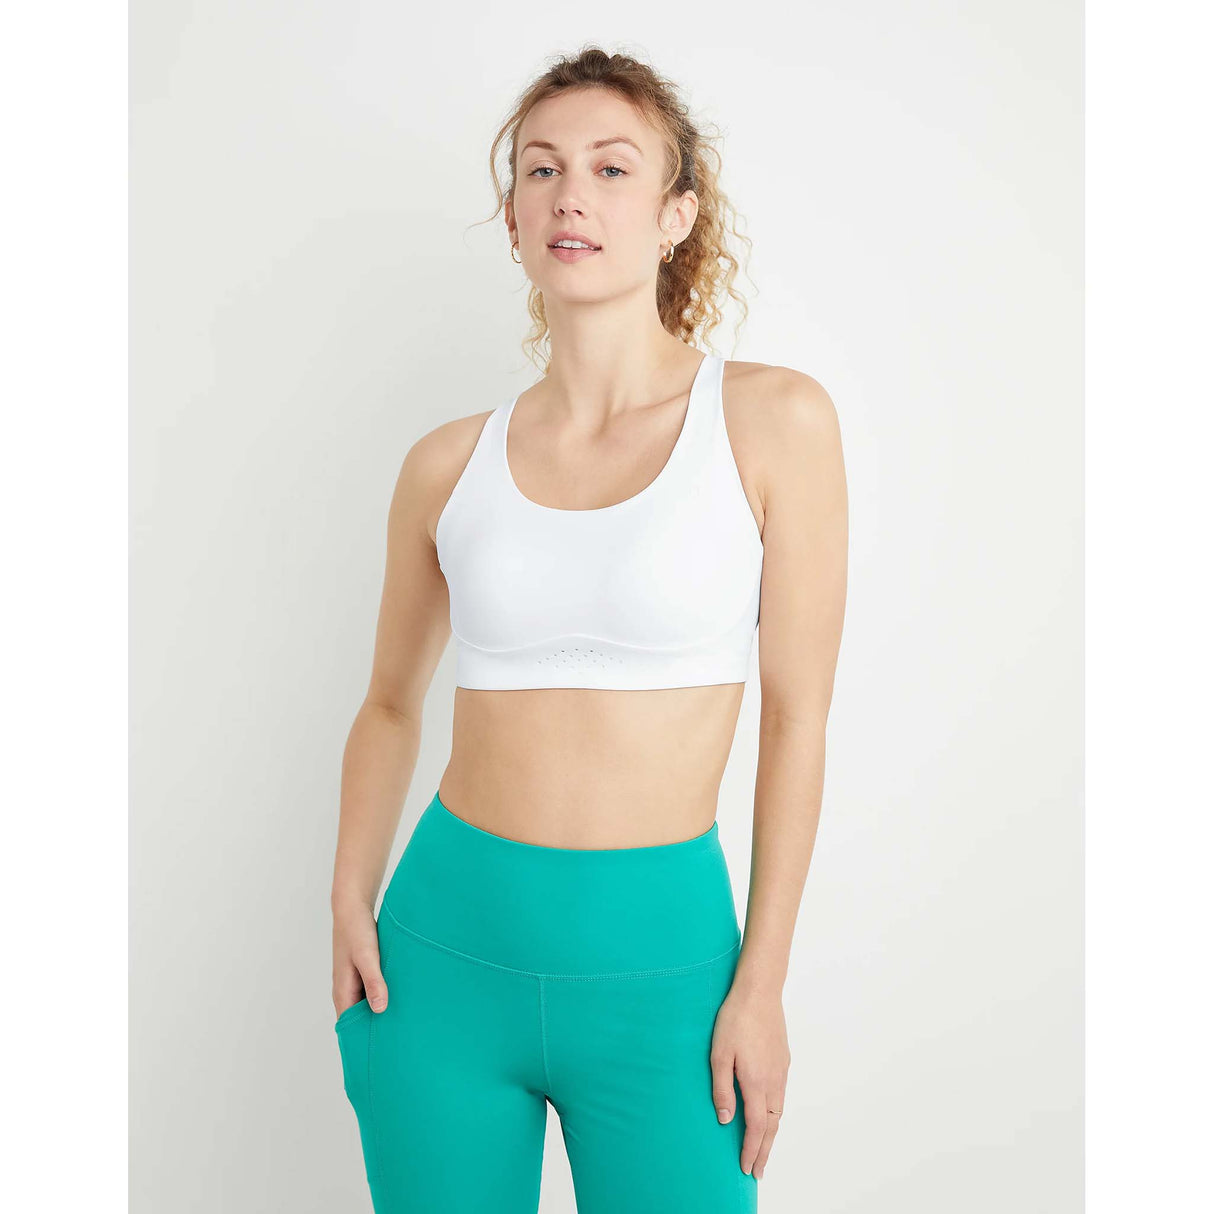 Champion The Absolute Max soutien-gorge sport blanc